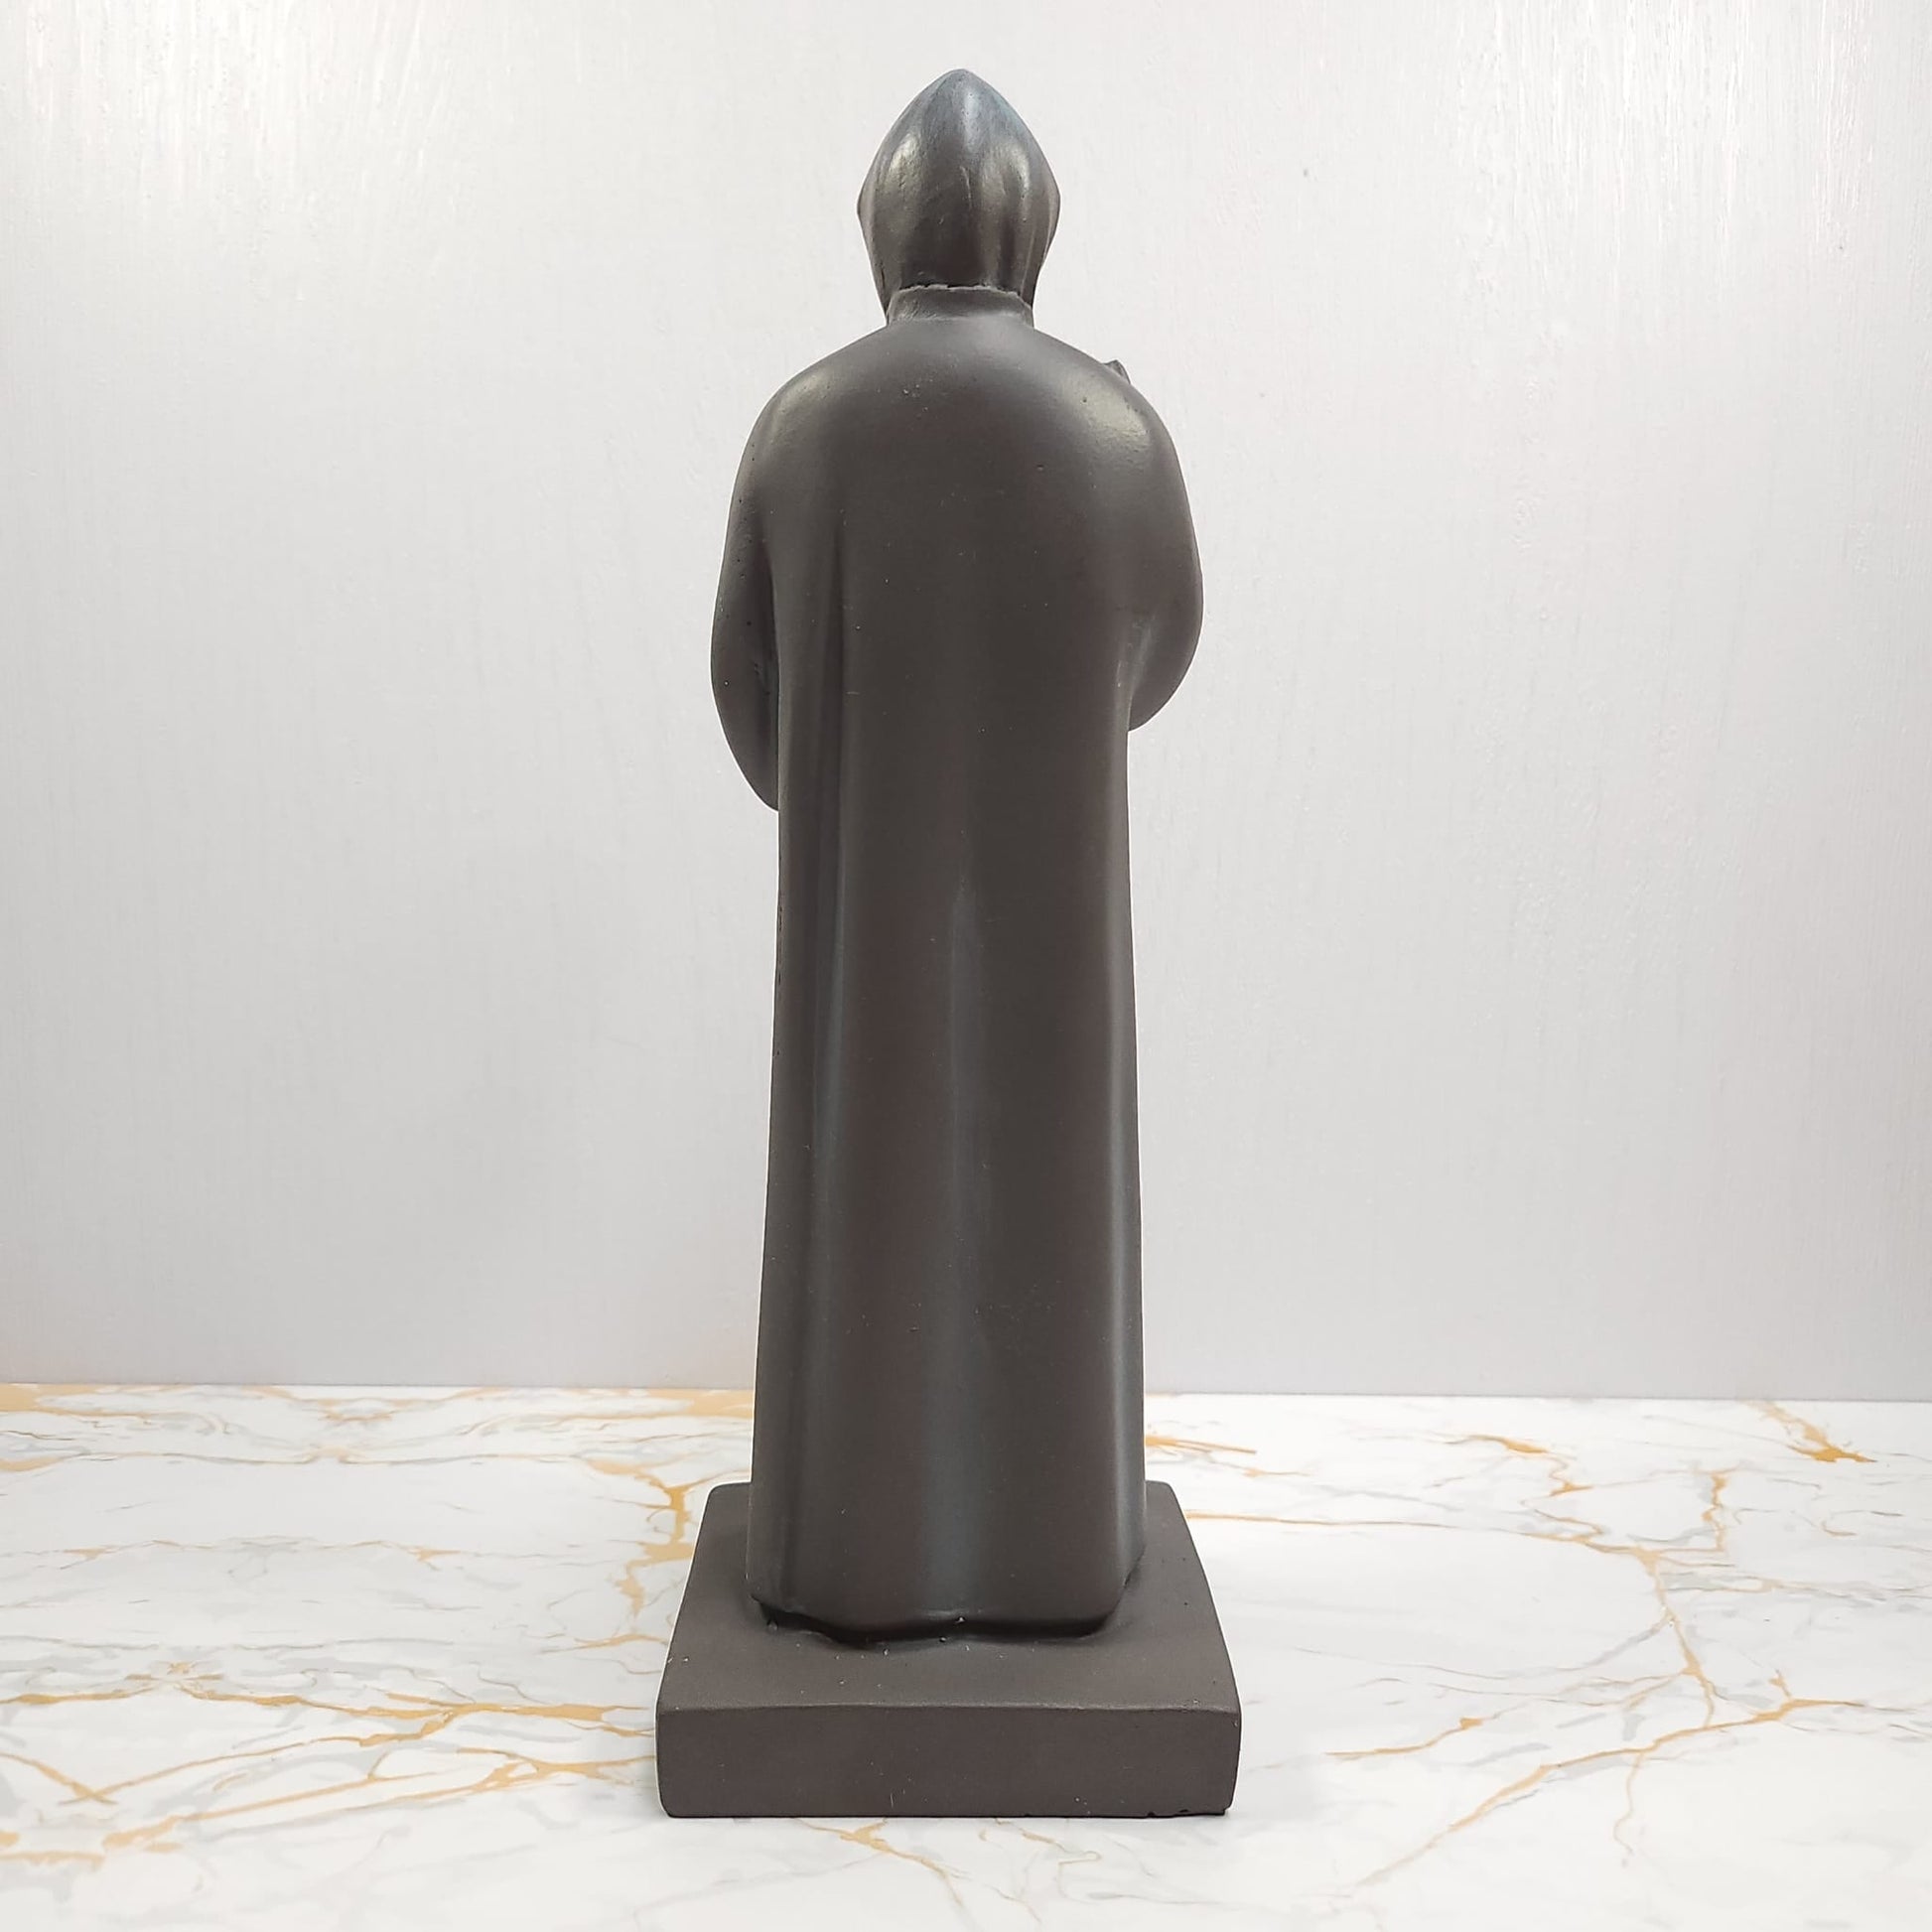 Statue of Saint Charbel from Annaya - Our Lady of Gifts